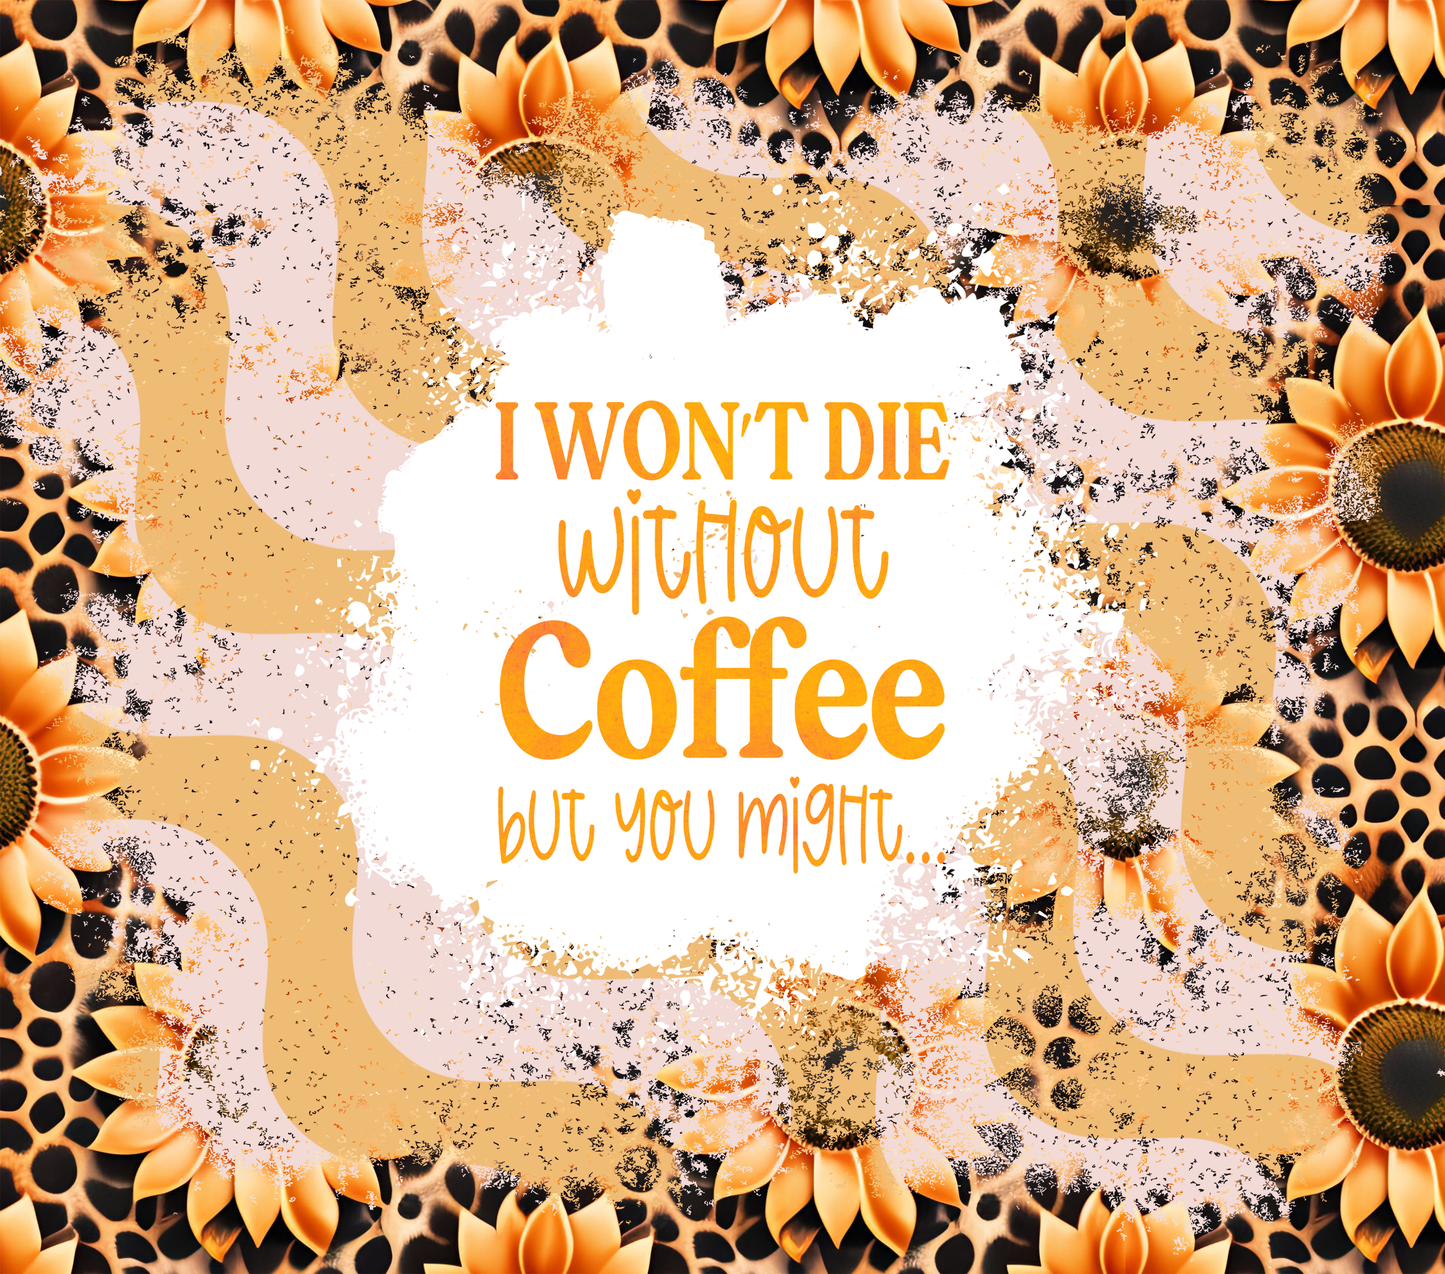 Won't Die without Coffee